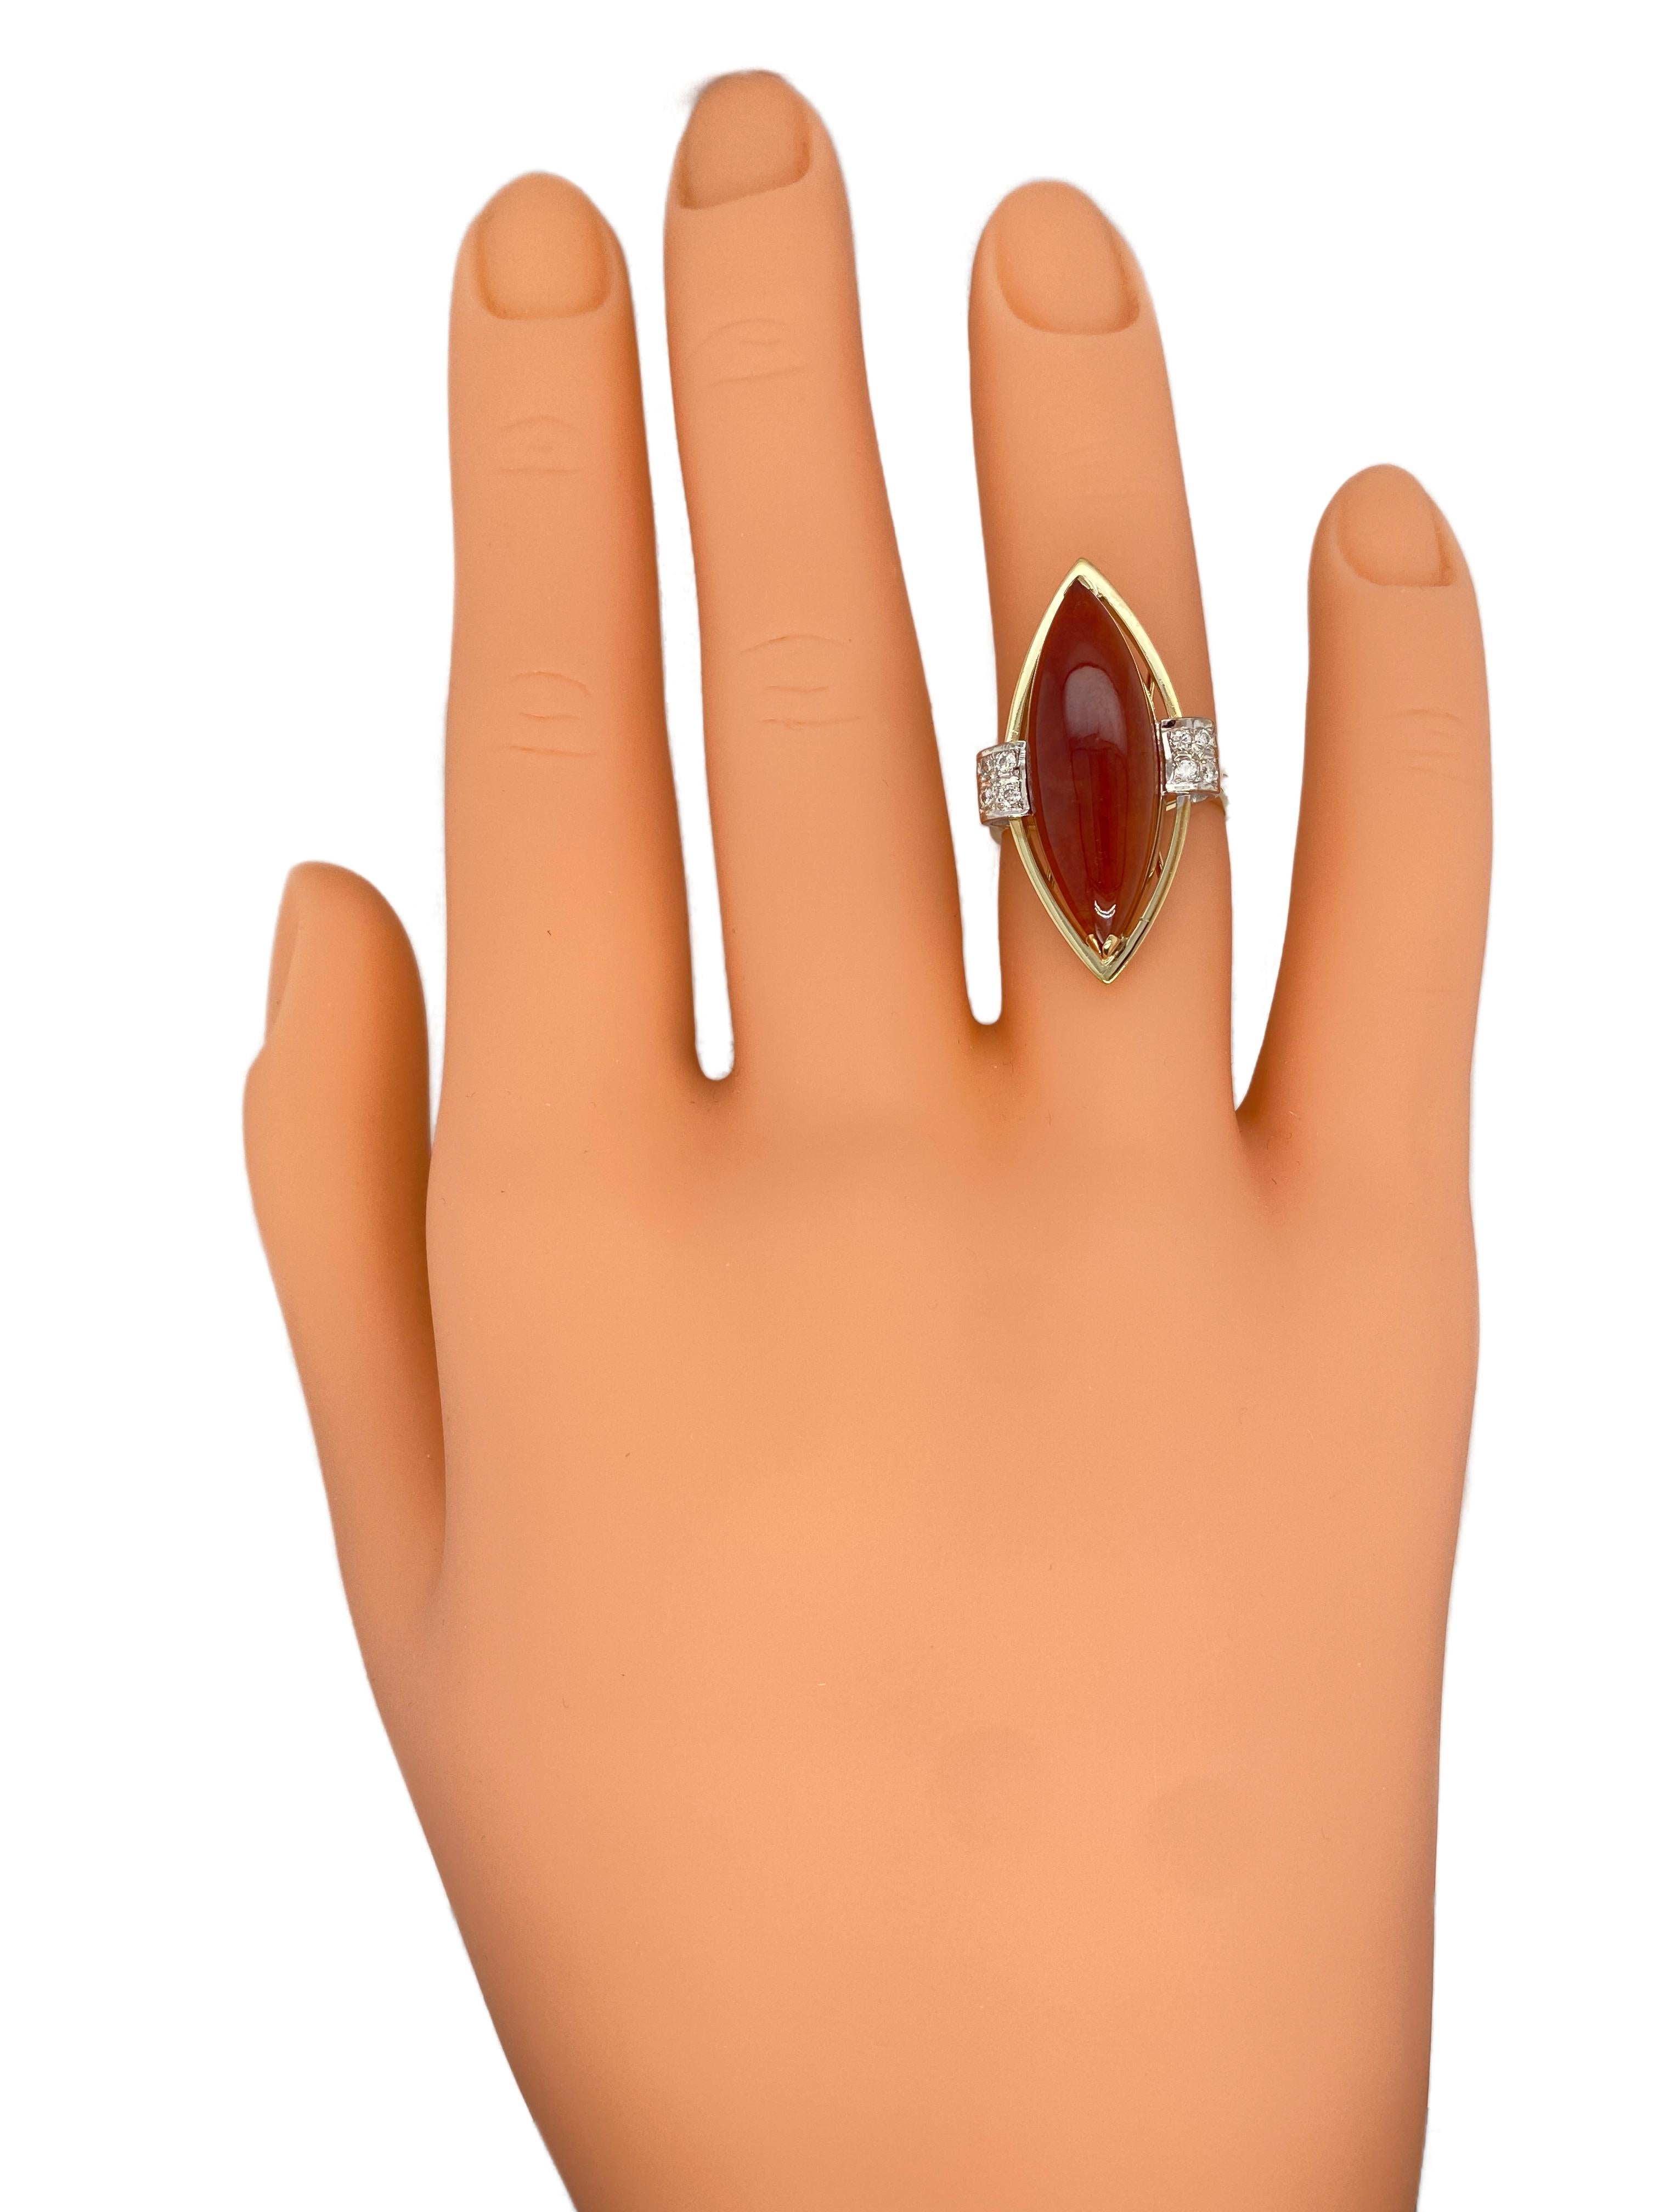 Art Deco Circa 1950s Marquise Carnelian and Diamond Cocktail Ring in 14K Gold For Sale